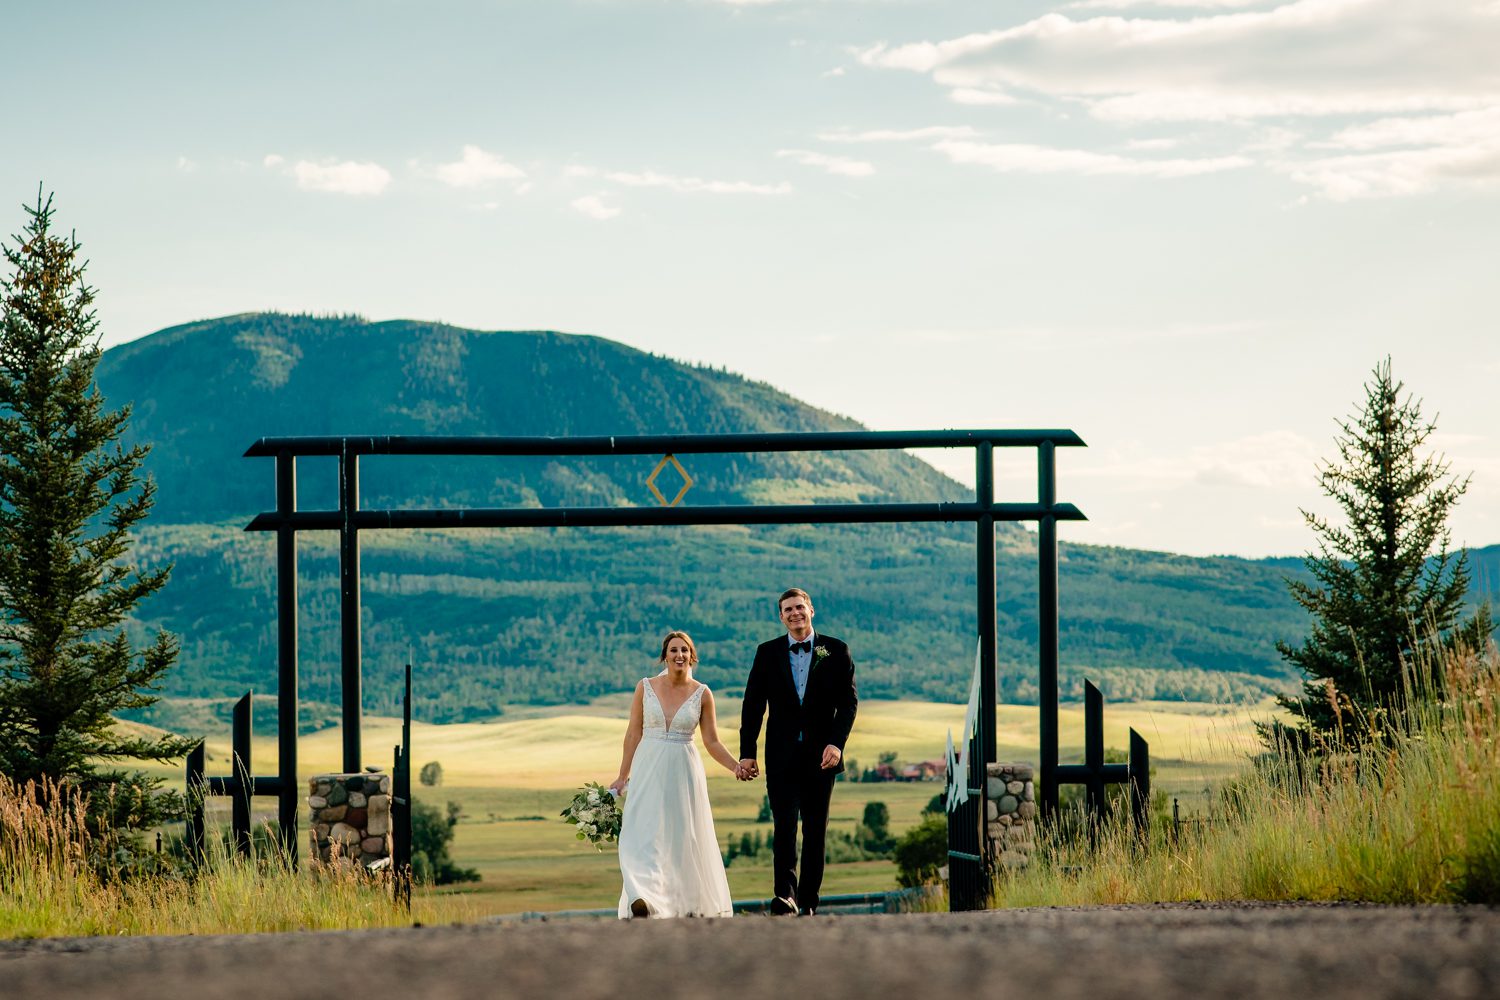 A bride and groom walking down a road with mountains in the background at a Steamboat Springs wedding.